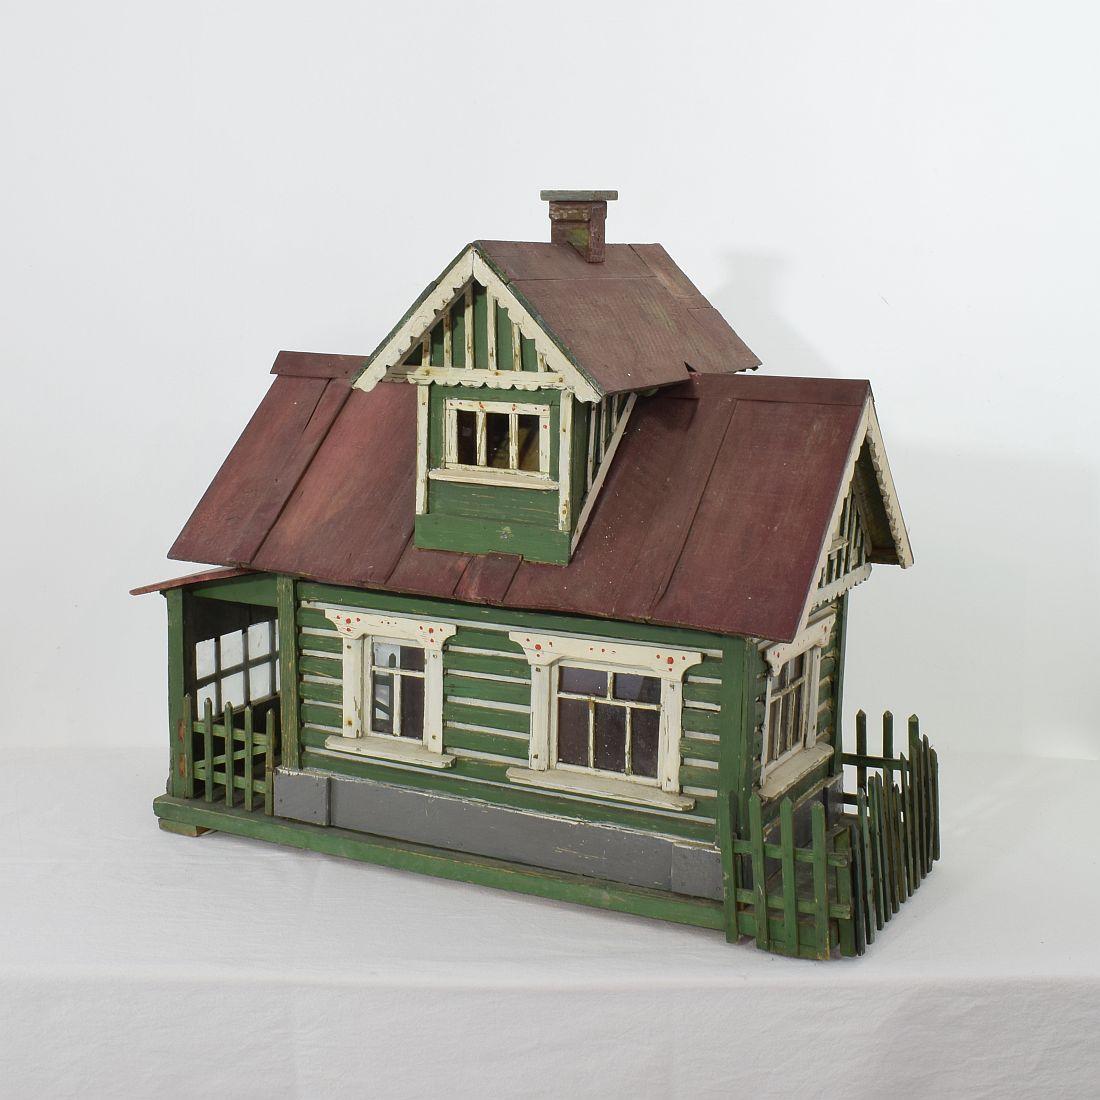 Wonderful Folk Art miniature house with beautiful colors and details. Most likely once used to house guinea pigs. Roof can be taken off and the small garden fence can be opened so that the guinea pig could walk around outside.
Rare and very